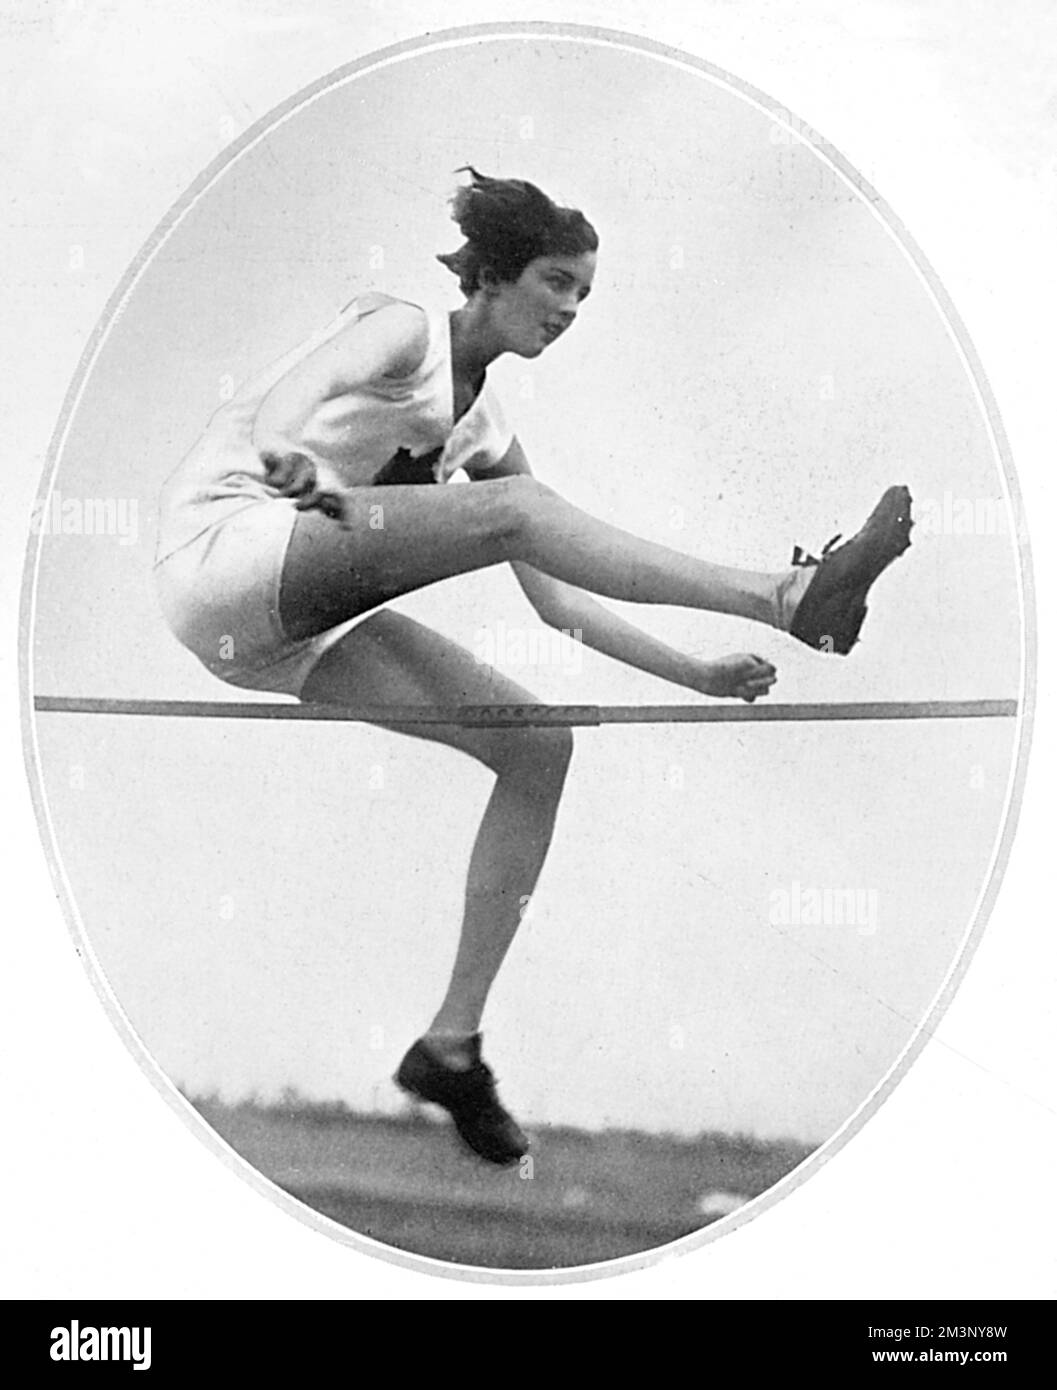 Ethel Mary Catherwood (1908-1987), Canadian athlete and winner of the first women's Olympic gold medal in the high jump at the 1928 Amsterdam Olympic Games, setting a world record in the process. Pictured in action - she was offered a film contract after the Olympics.  1928 Stock Photo